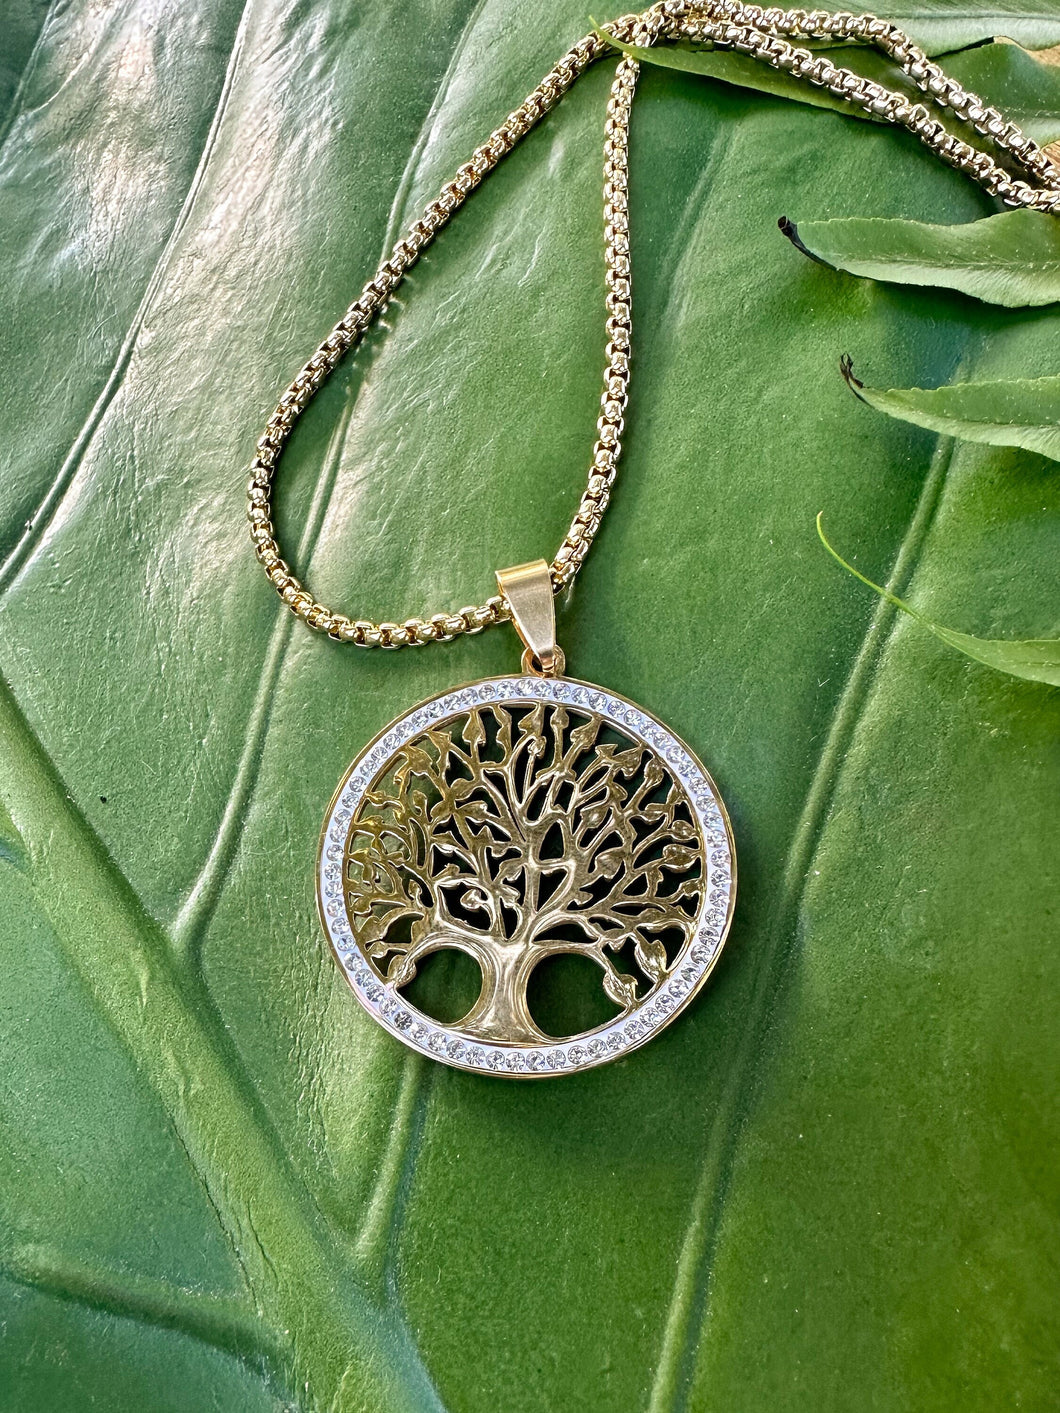 TREE of LIFE Gold Necklace with Cubic Zirconia Crystals | Tree Pendant Yoga Necklace w/ Gift Box | Sacred Geometry, Boho Jewelry, Mayan Rose